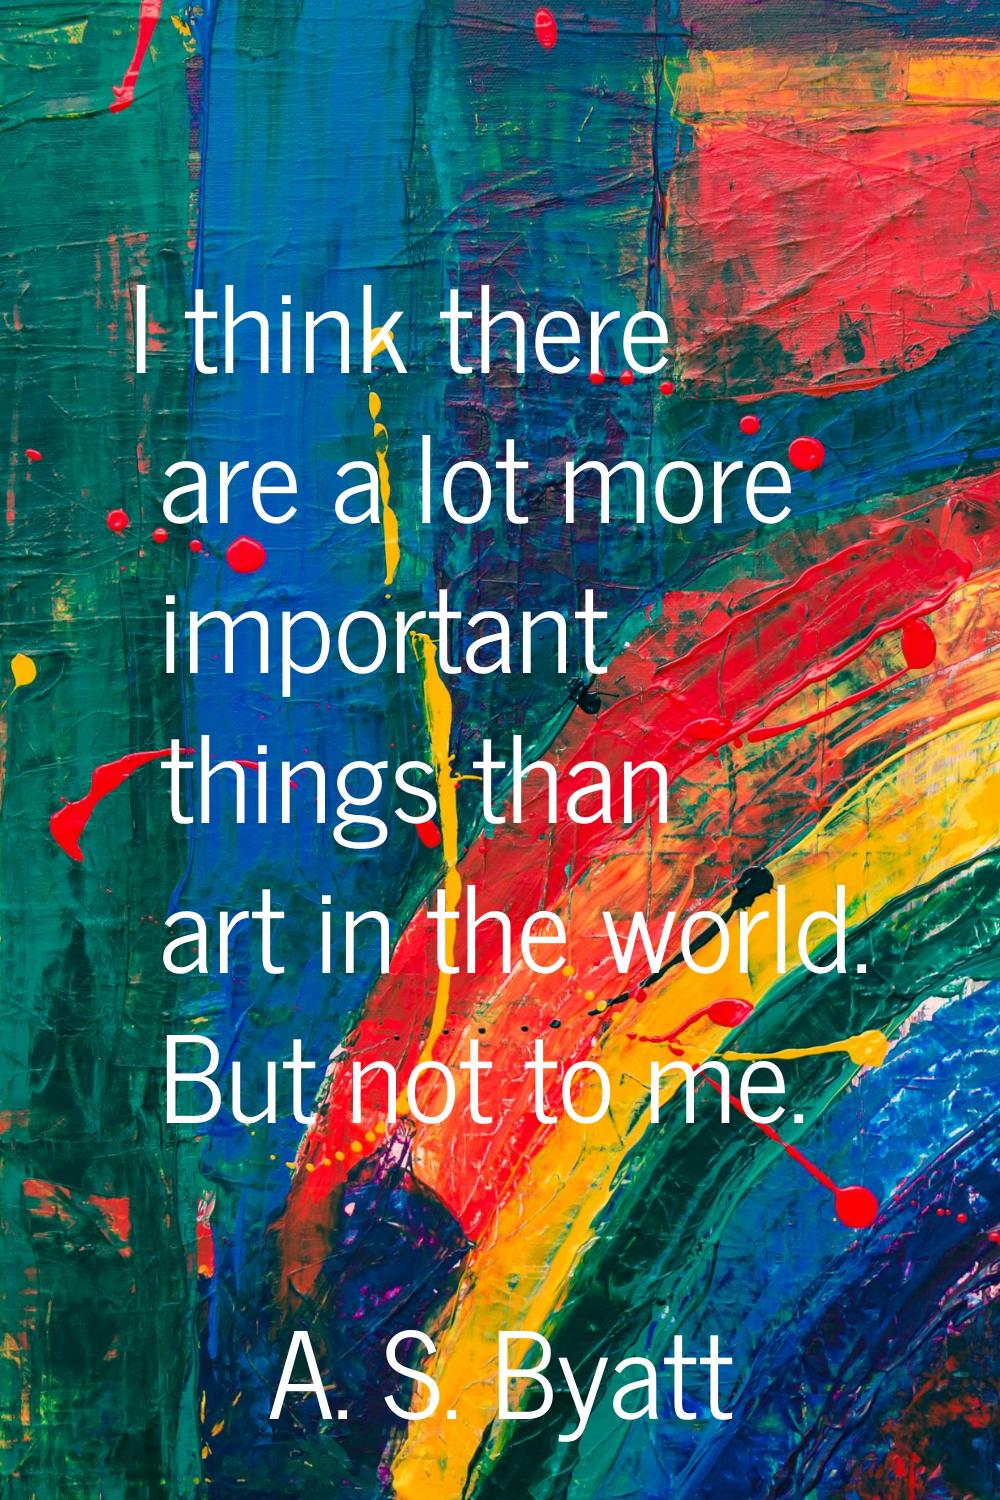 I think there are a lot more important things than art in the world. But not to me.